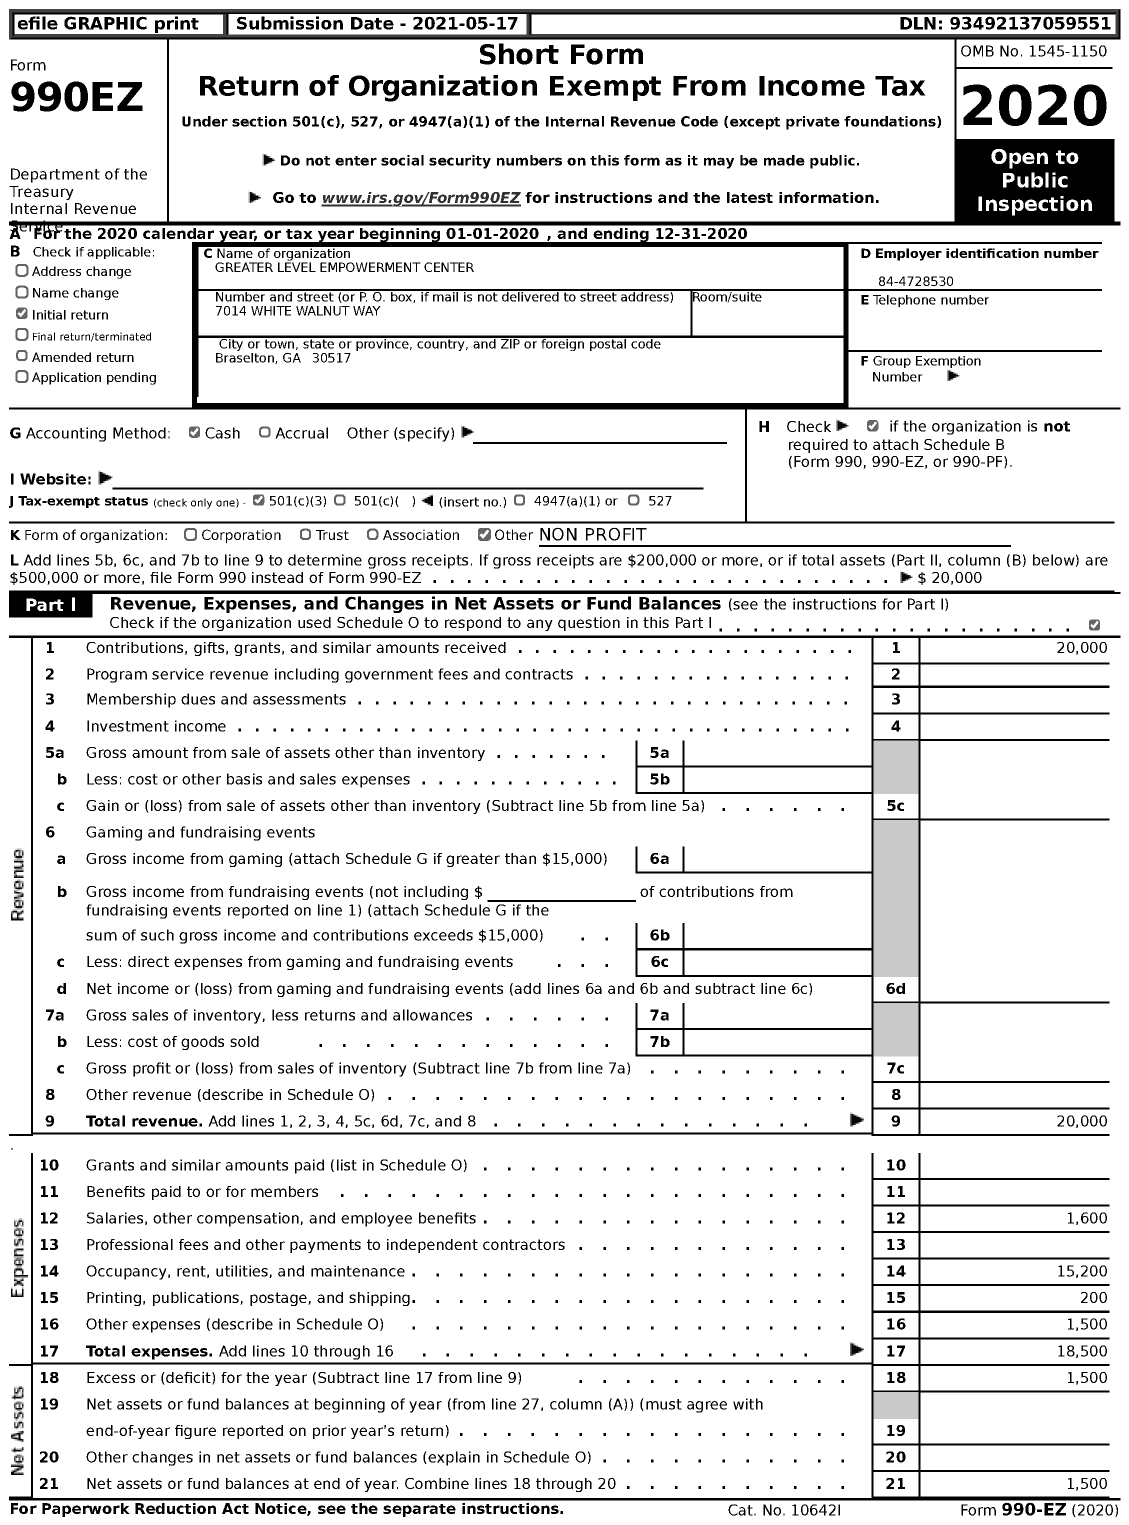 Image of first page of 2020 Form 990EZ for Greater Level Empowerment Center